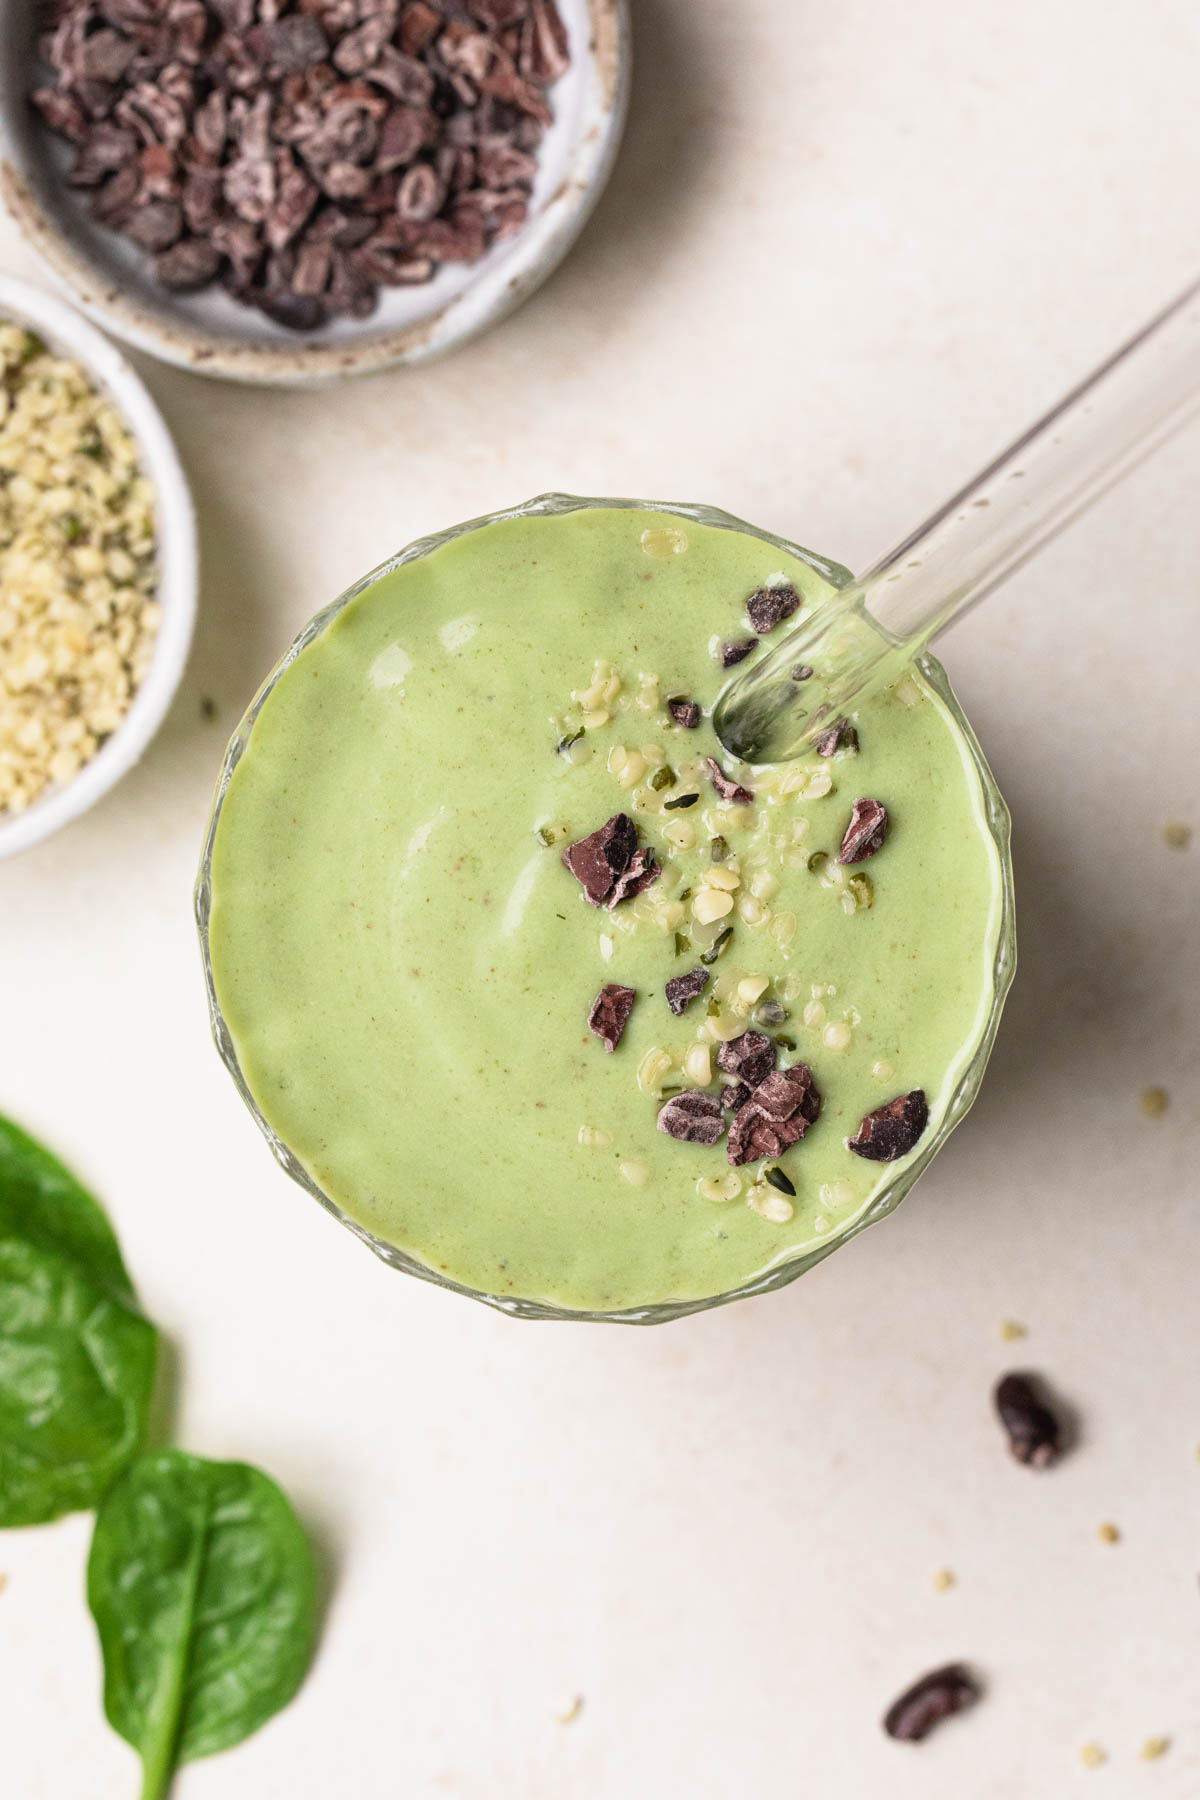 Top down image of a banana avocado green smoothie in a glass topped with cacao nibs